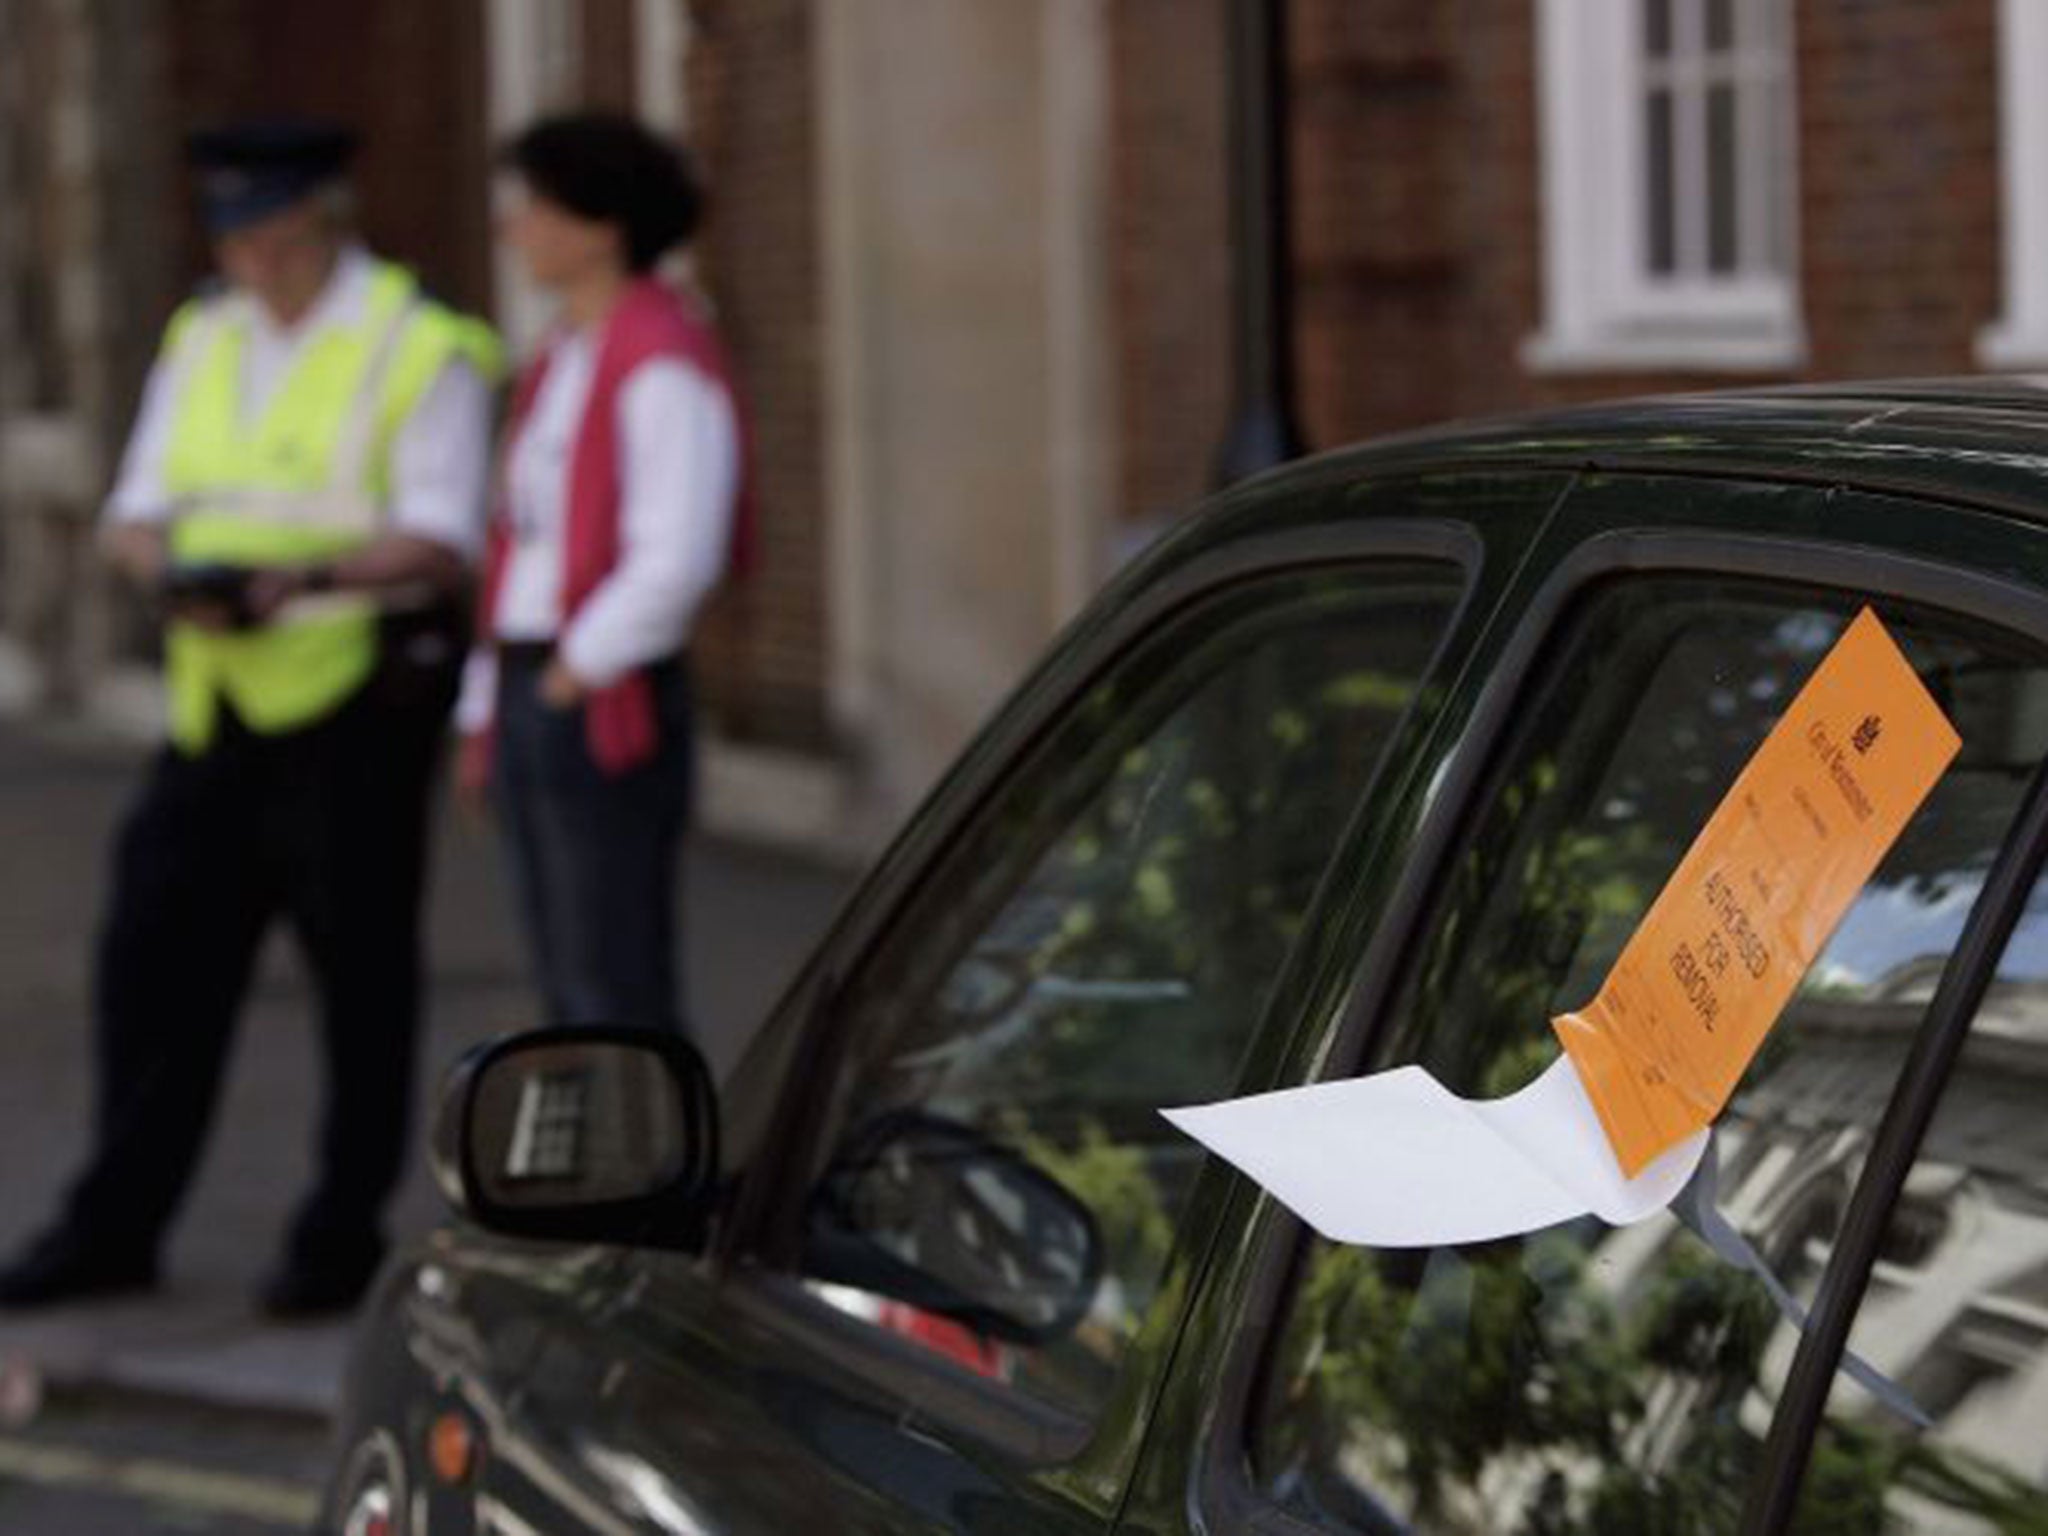 Drivers May Be Able To Reclaim Millions In Unfair Parking Fines The Independent The Independent